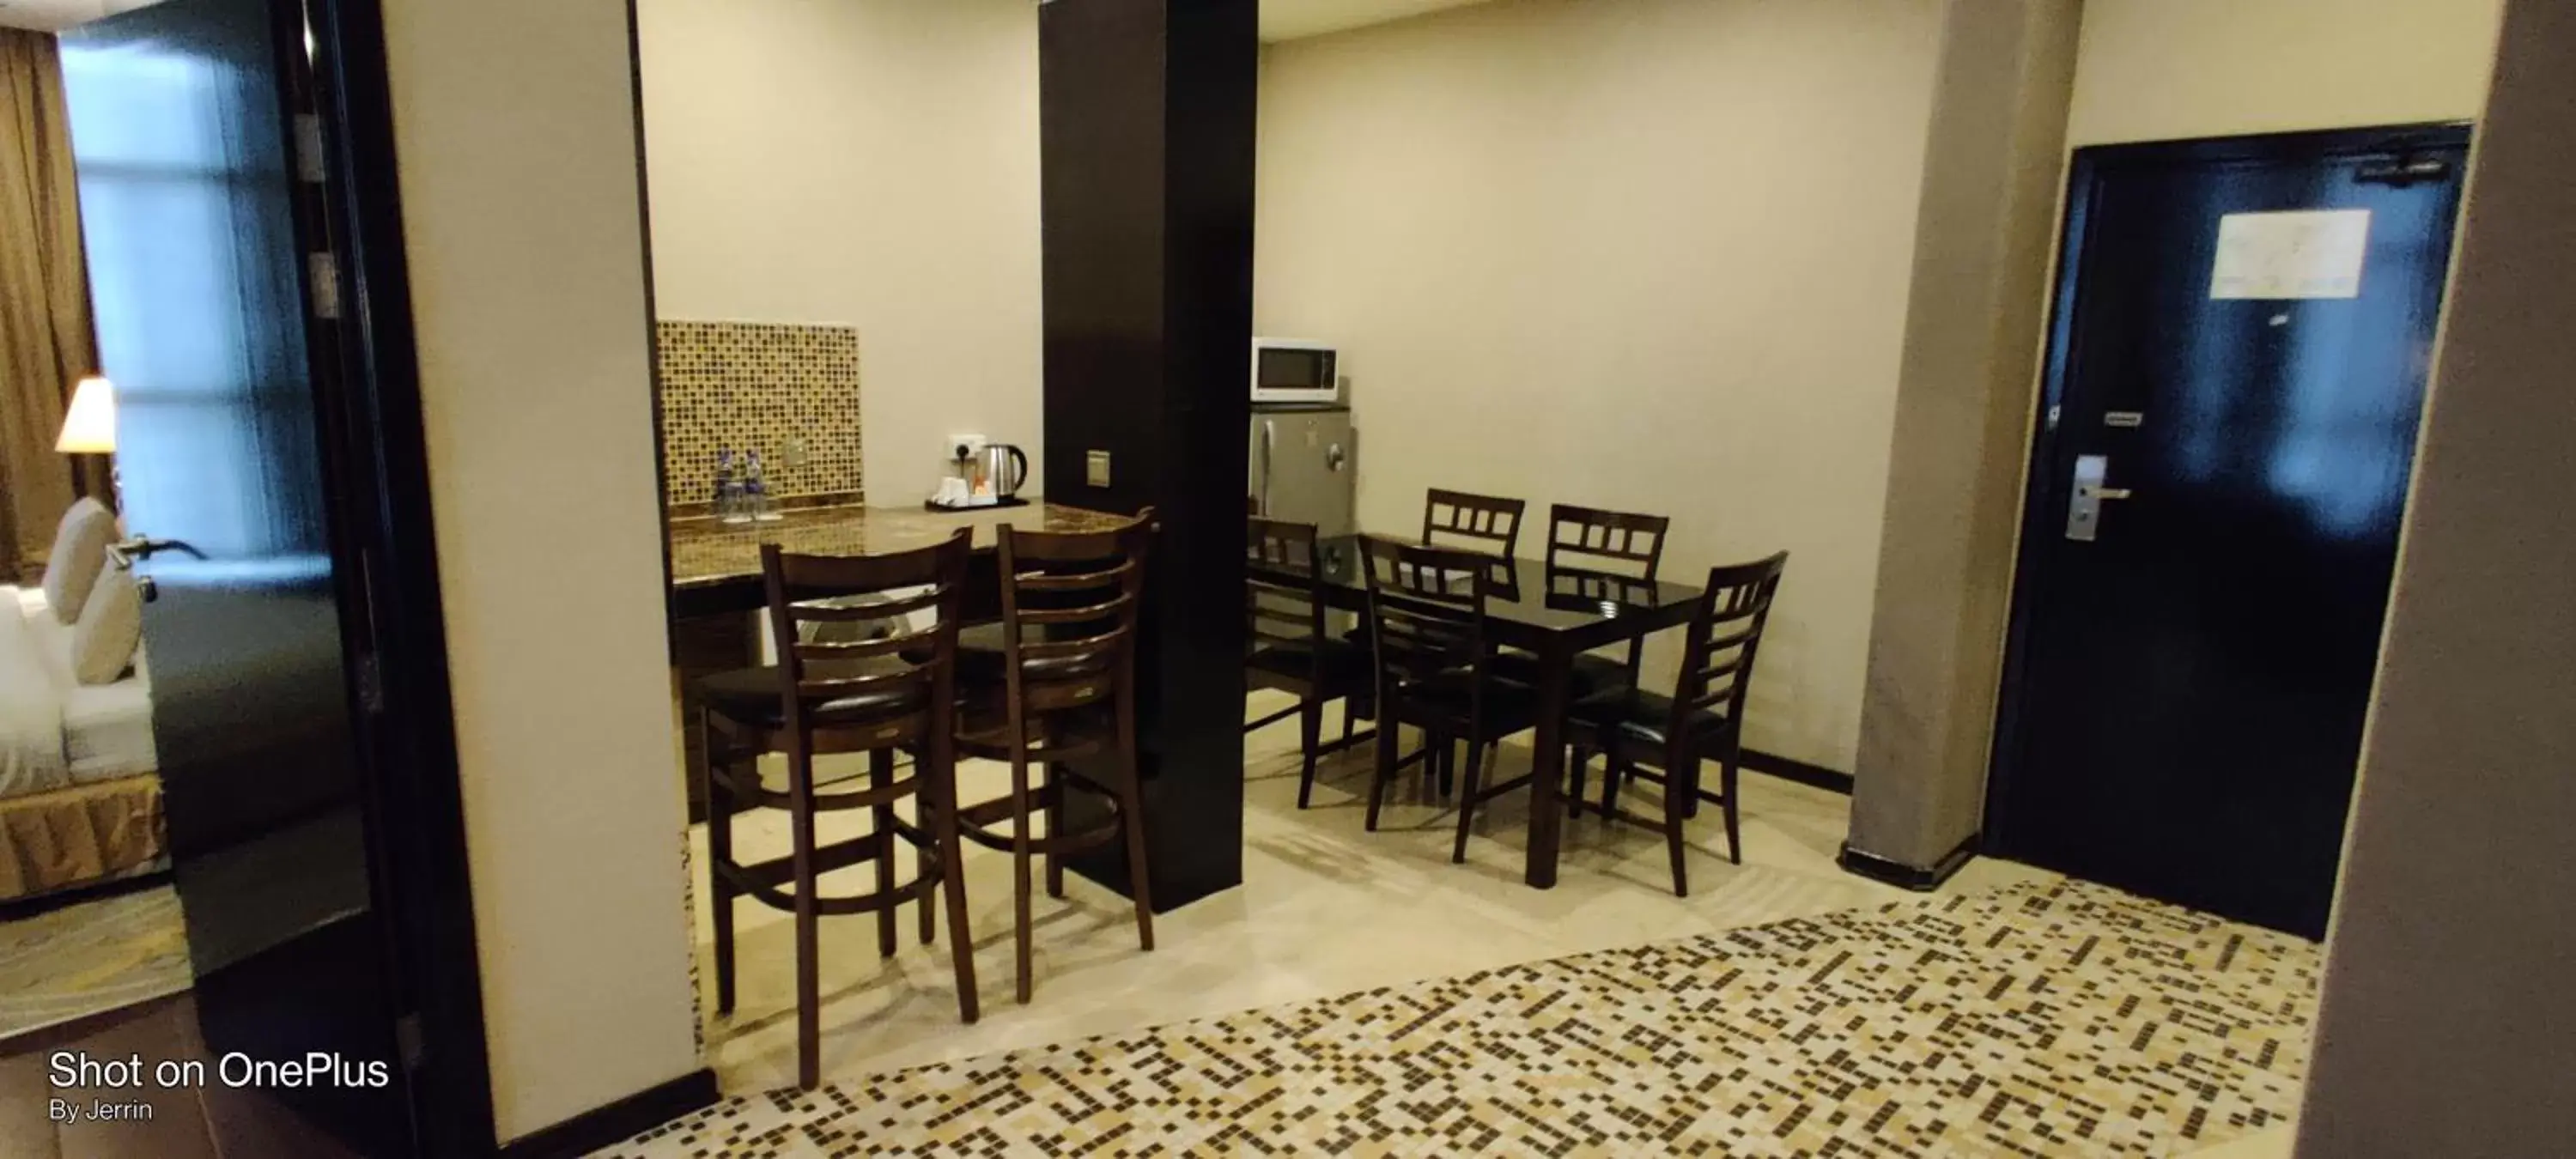 Dining Area in Nehal Hotel